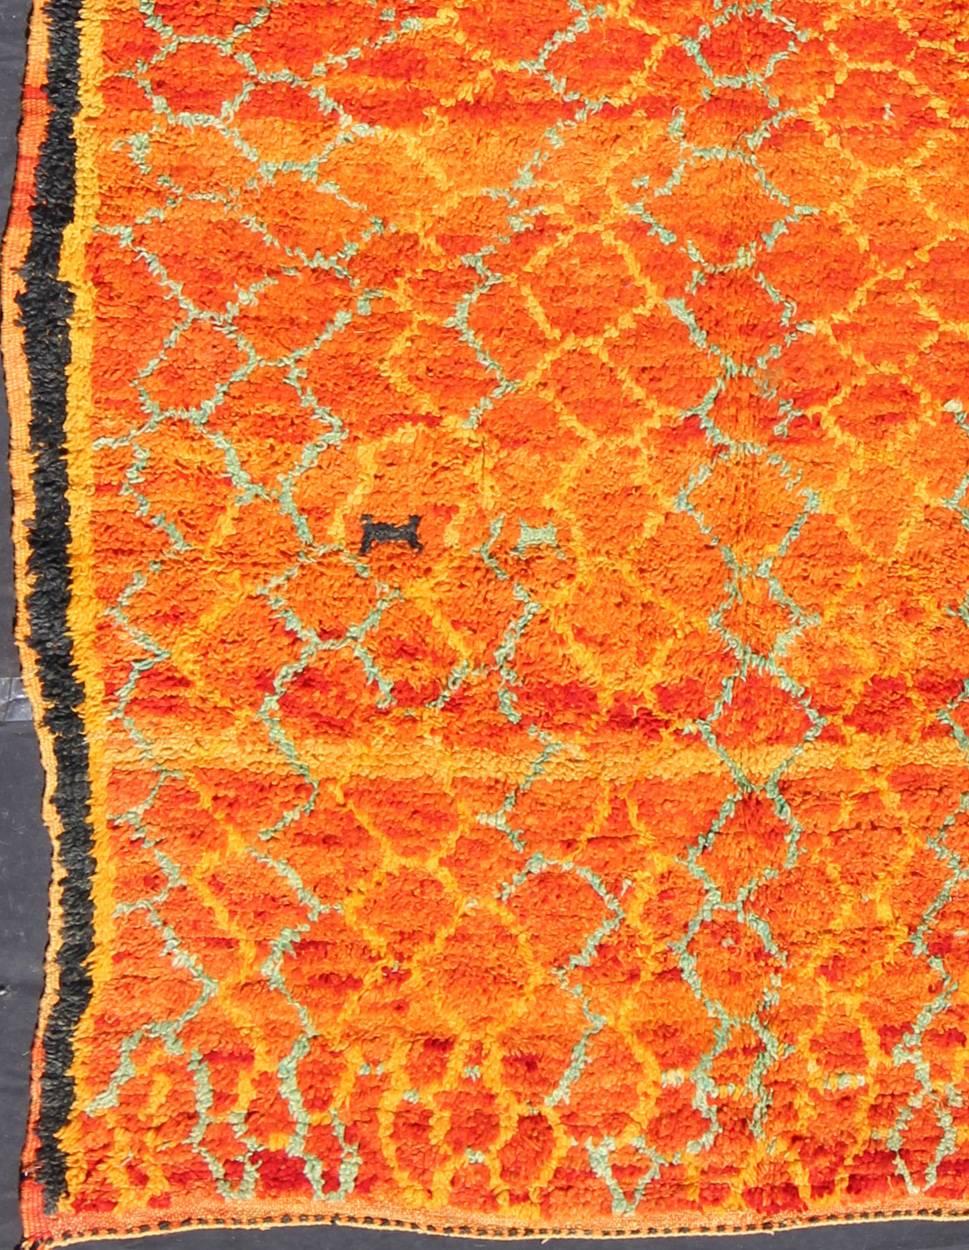 This rug was created in a deep tangerine, using pure hand spun wool, and features gentle colorful meandering lattice motifs with a strikingly creative use of color and balance. The thick charcoal lines function as a frame on each side of the rug.